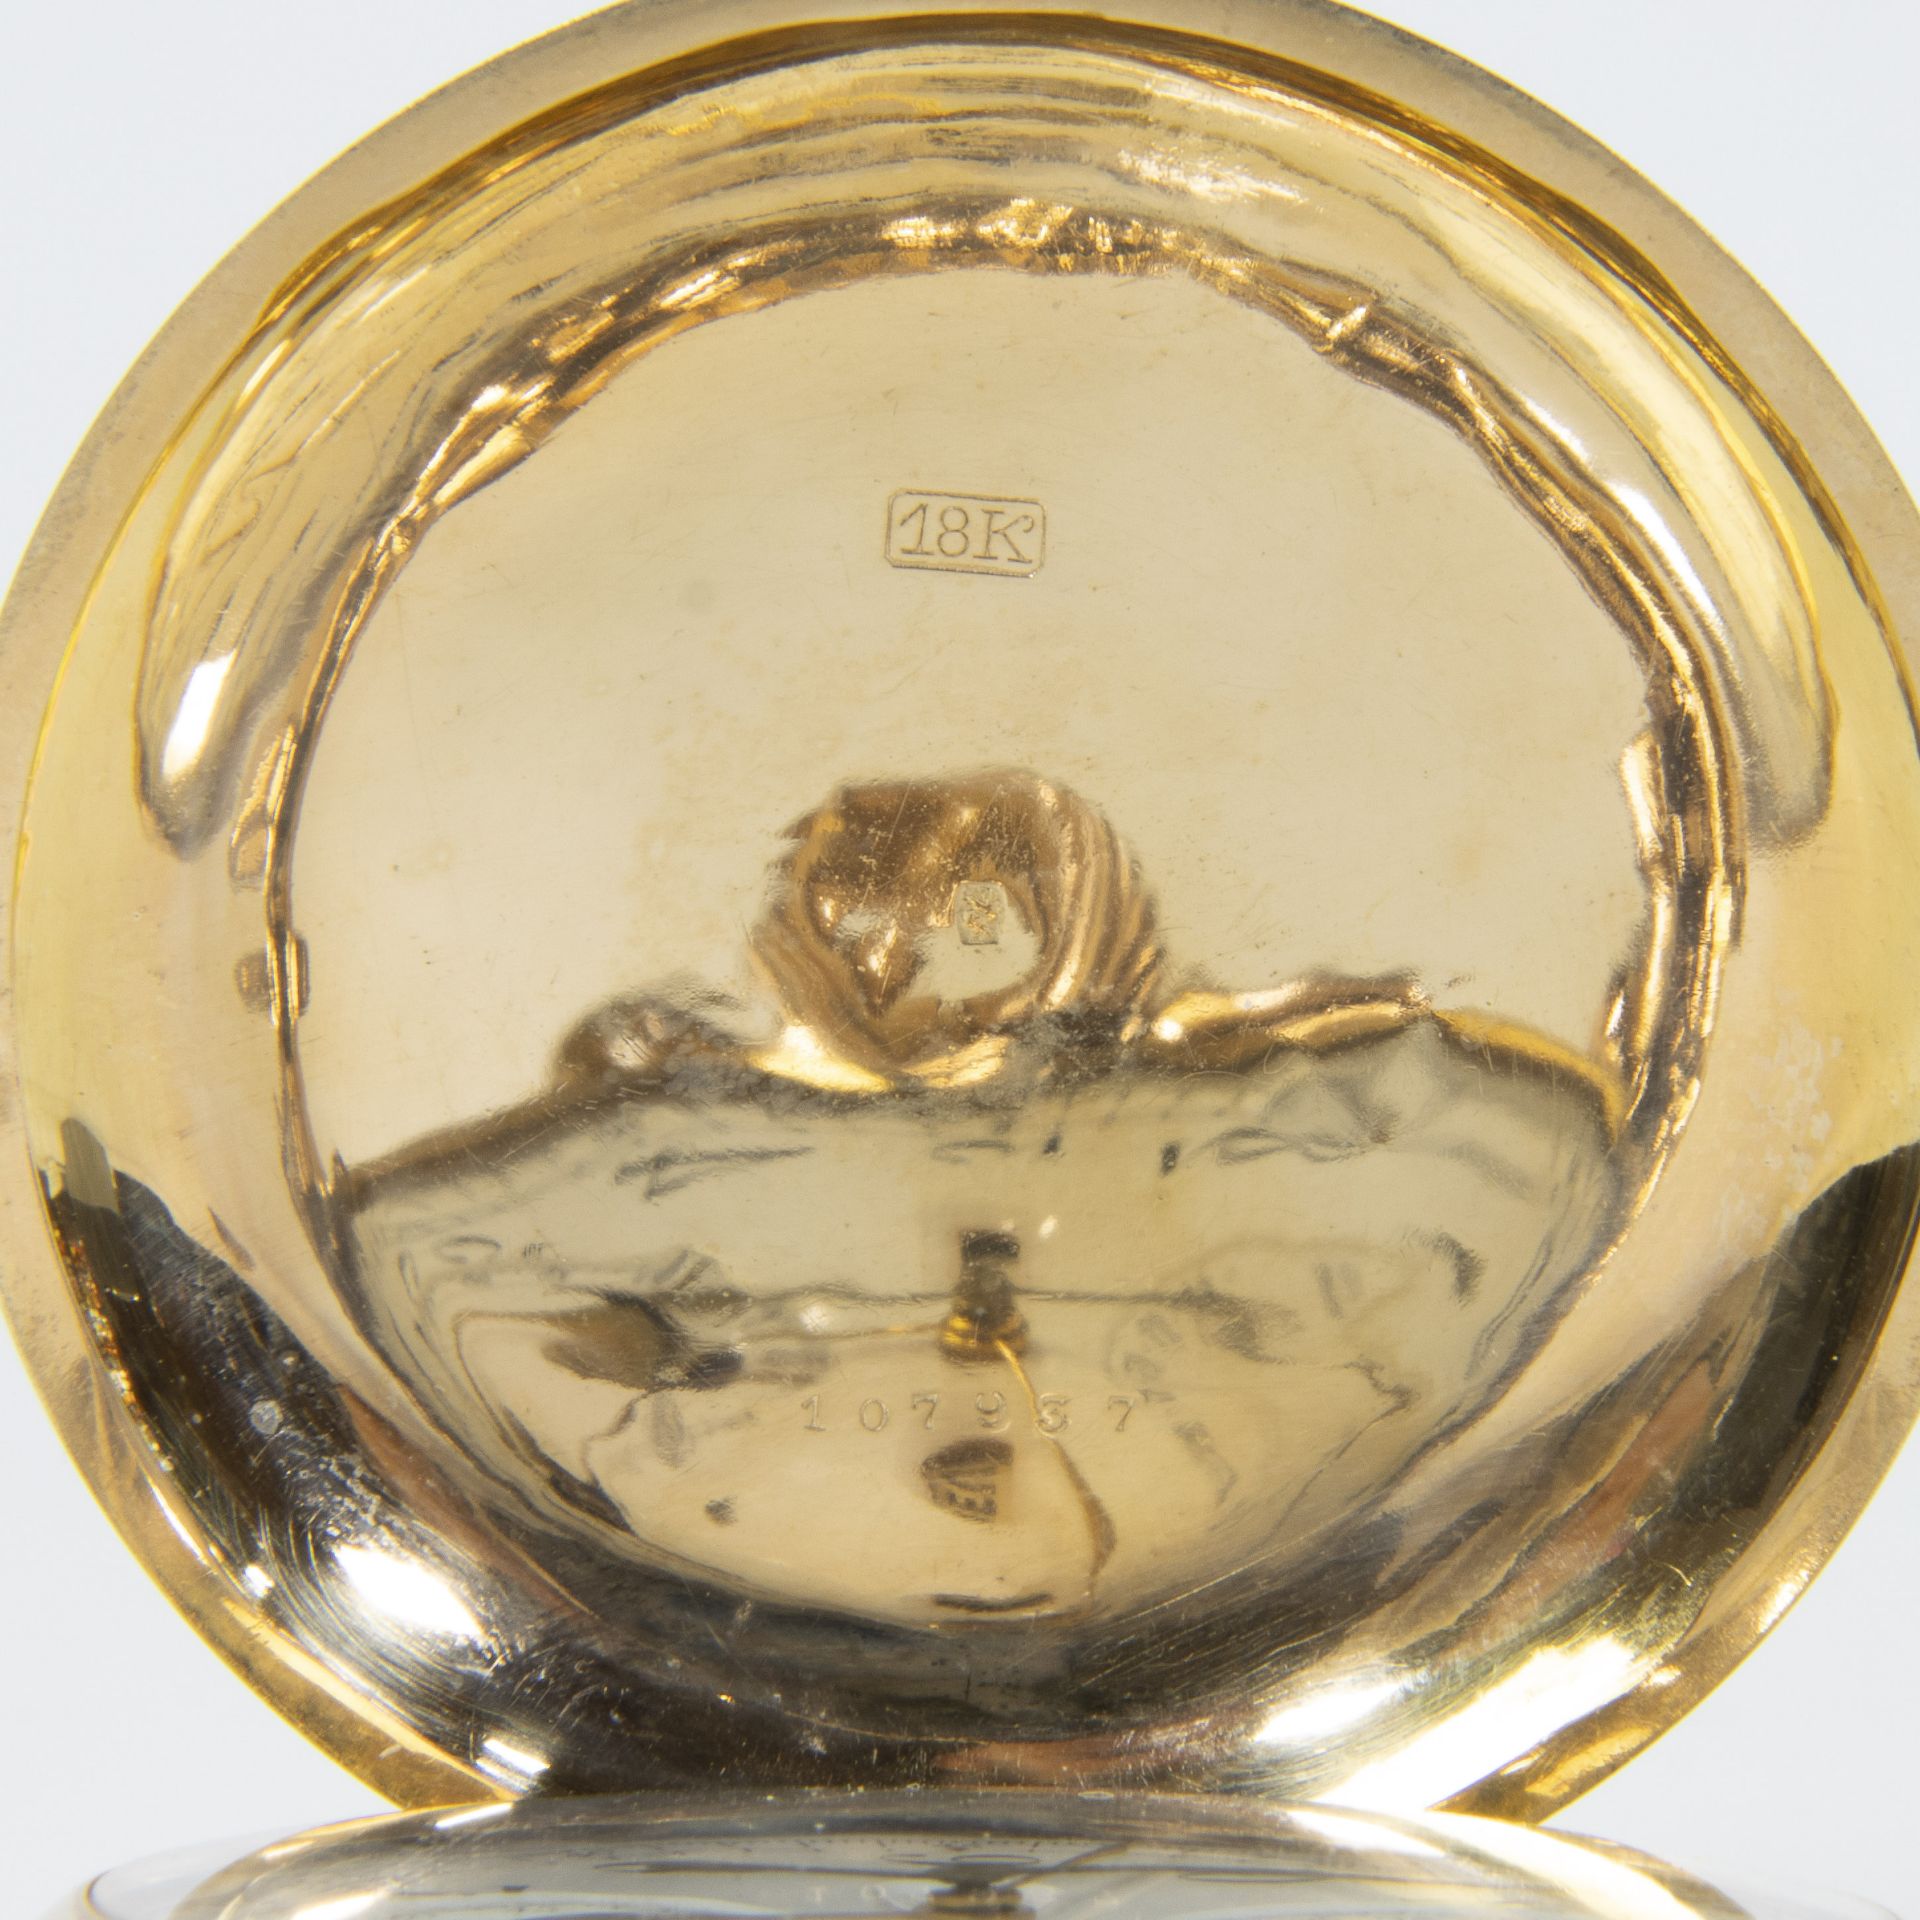 Gold pocket watch 'Le Phare' with golden chain (18 ct), 25 grams, Chronographe répétition, ca 1890 - Image 4 of 4